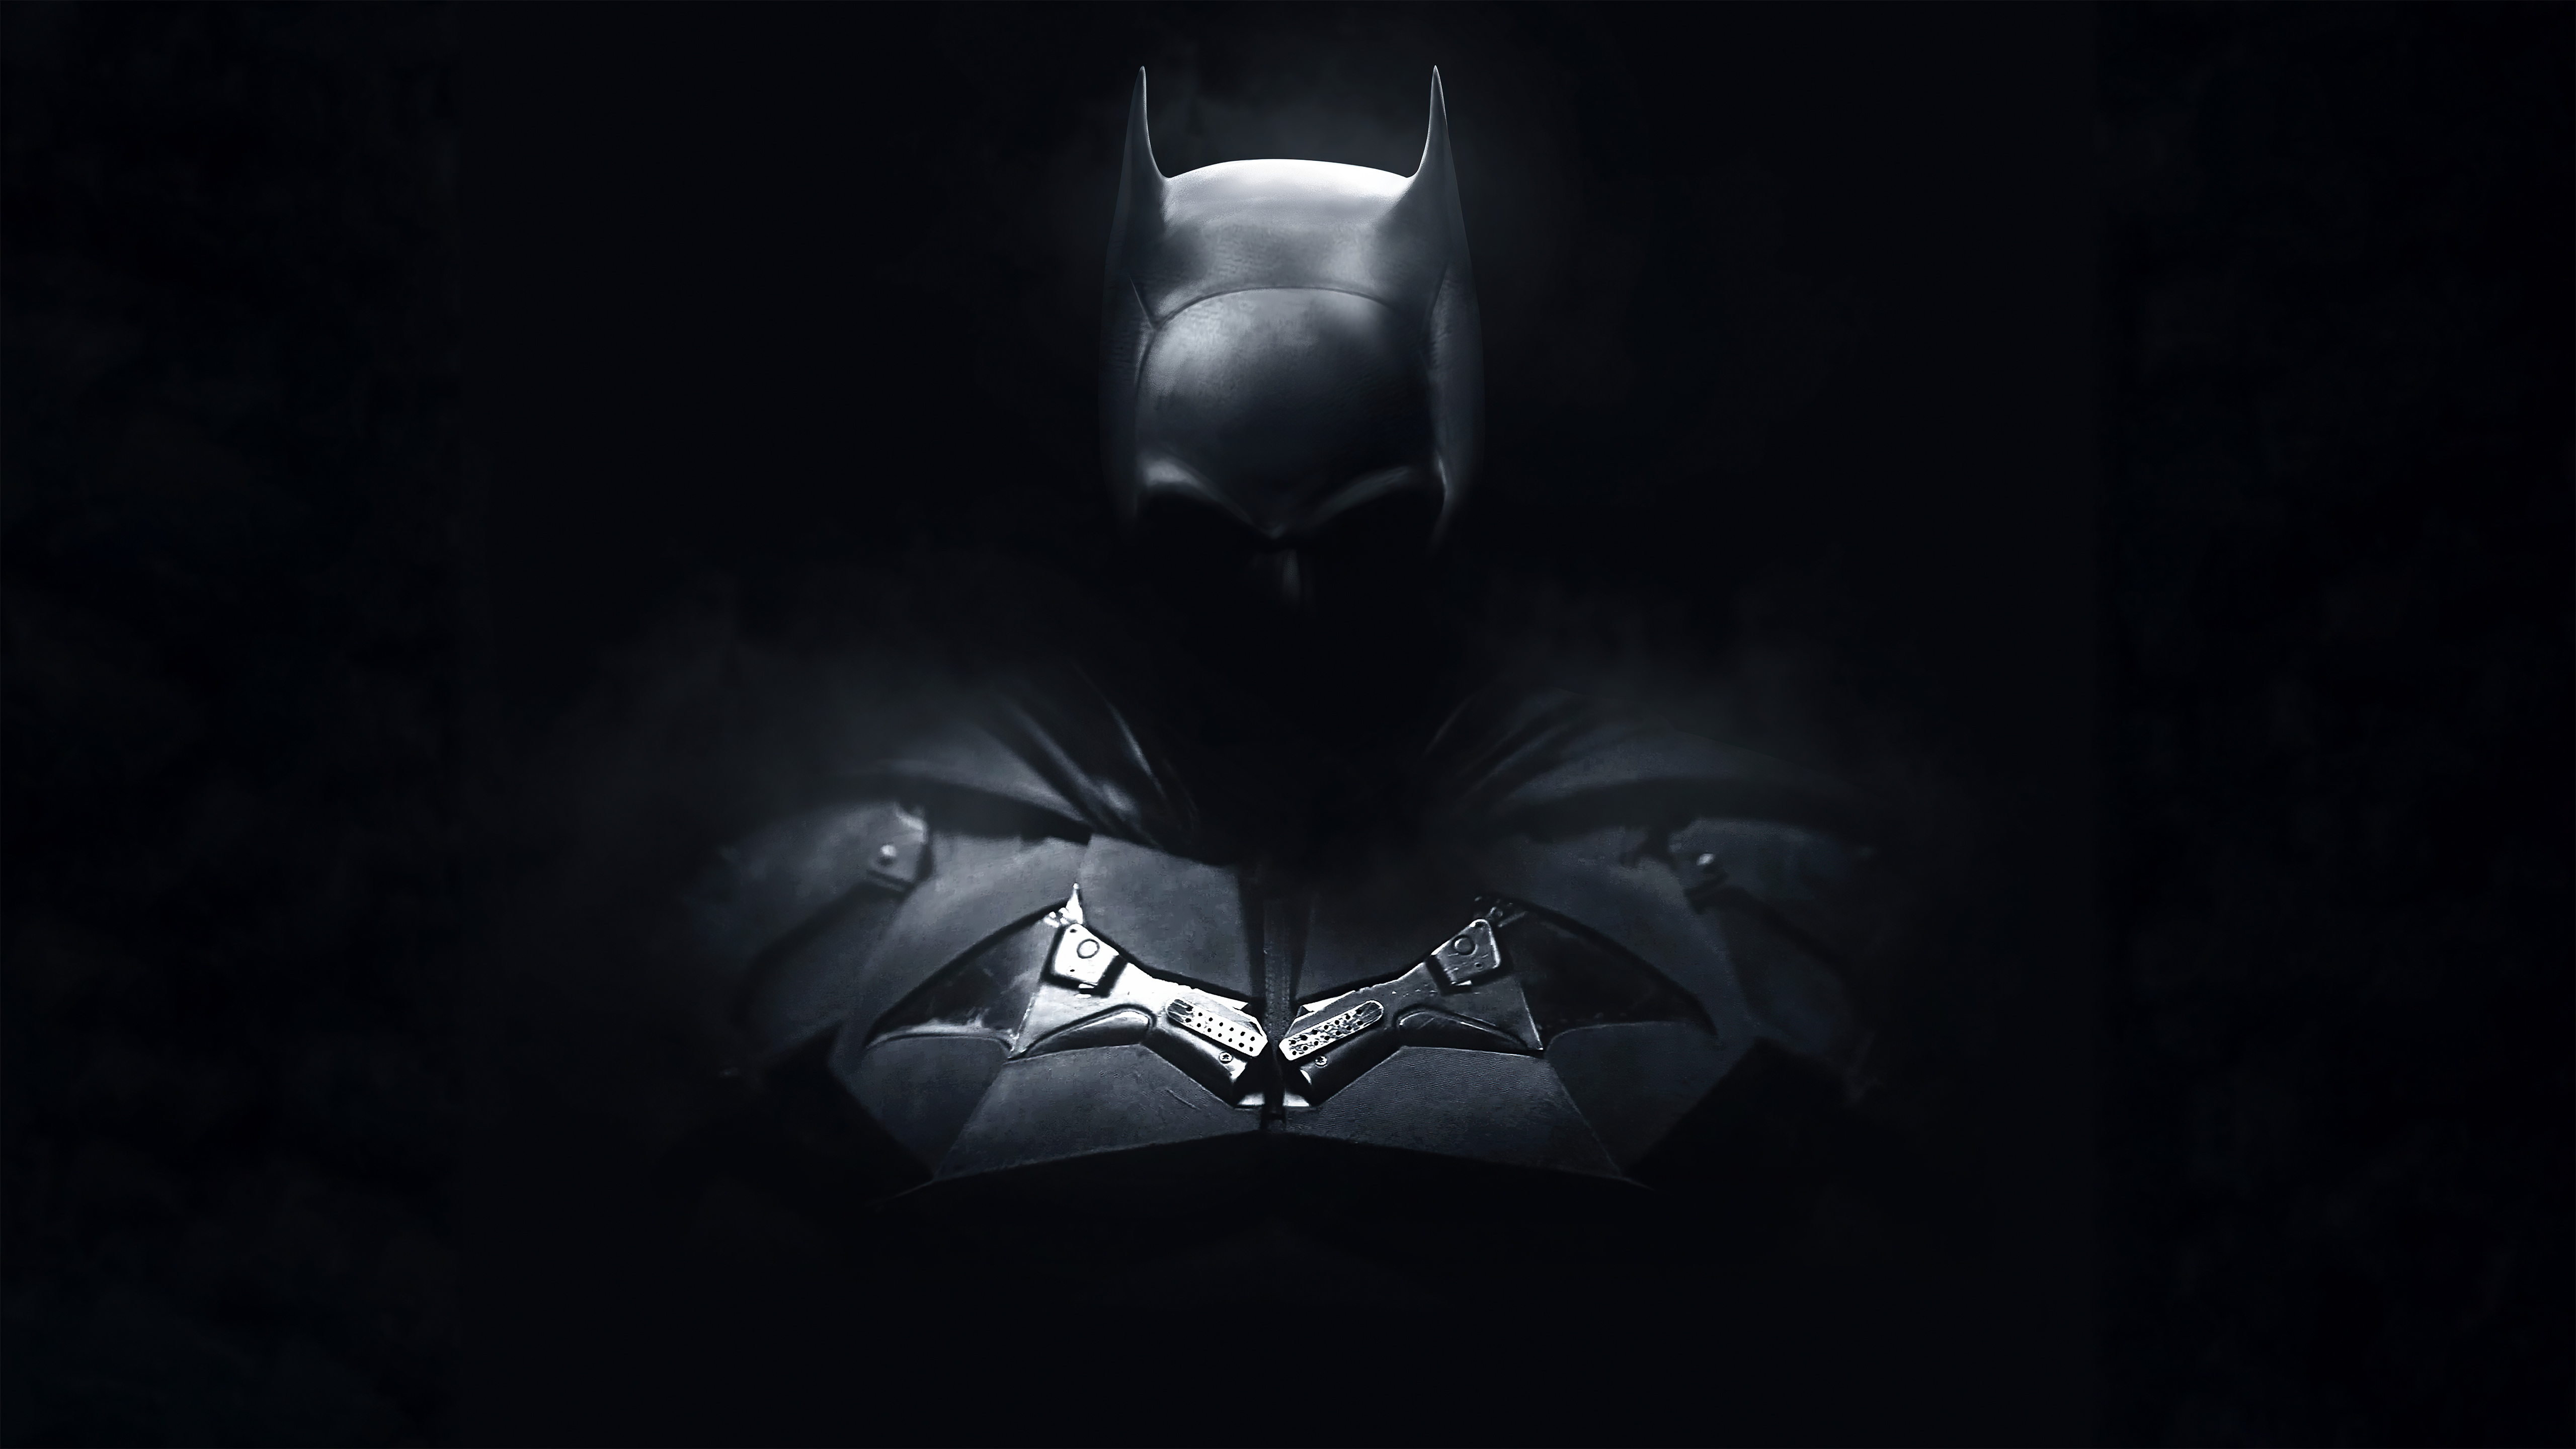 140+ The Batman HD Wallpapers and Backgrounds